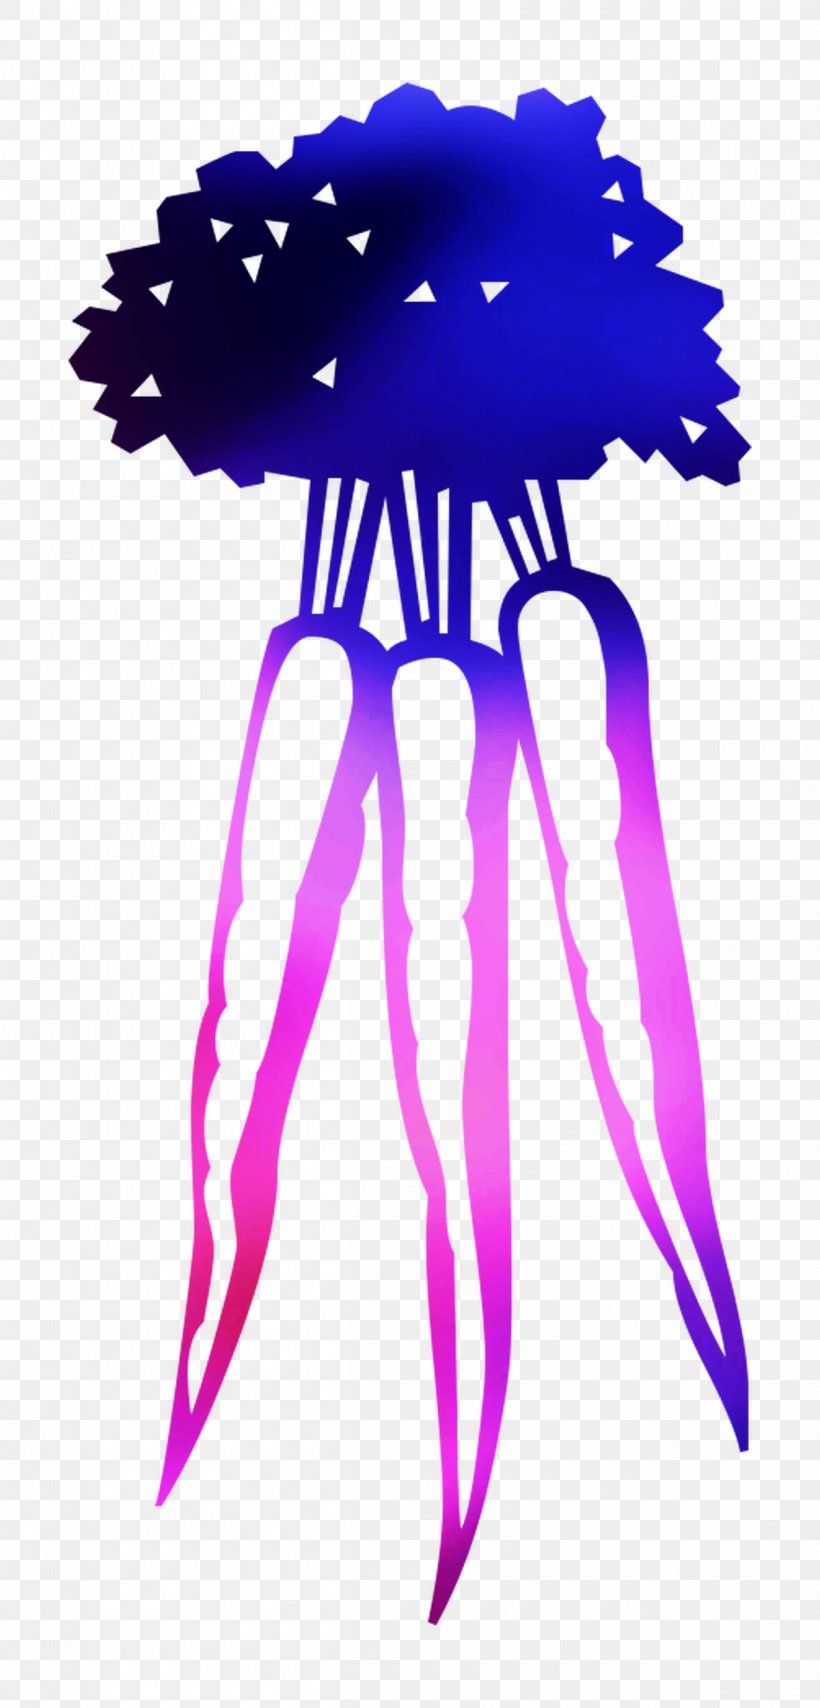 Clip Art Tree Character Purple Line, PNG, 1200x2500px, Tree, Character, Cnidaria, Fiction, Jellyfish Download Free